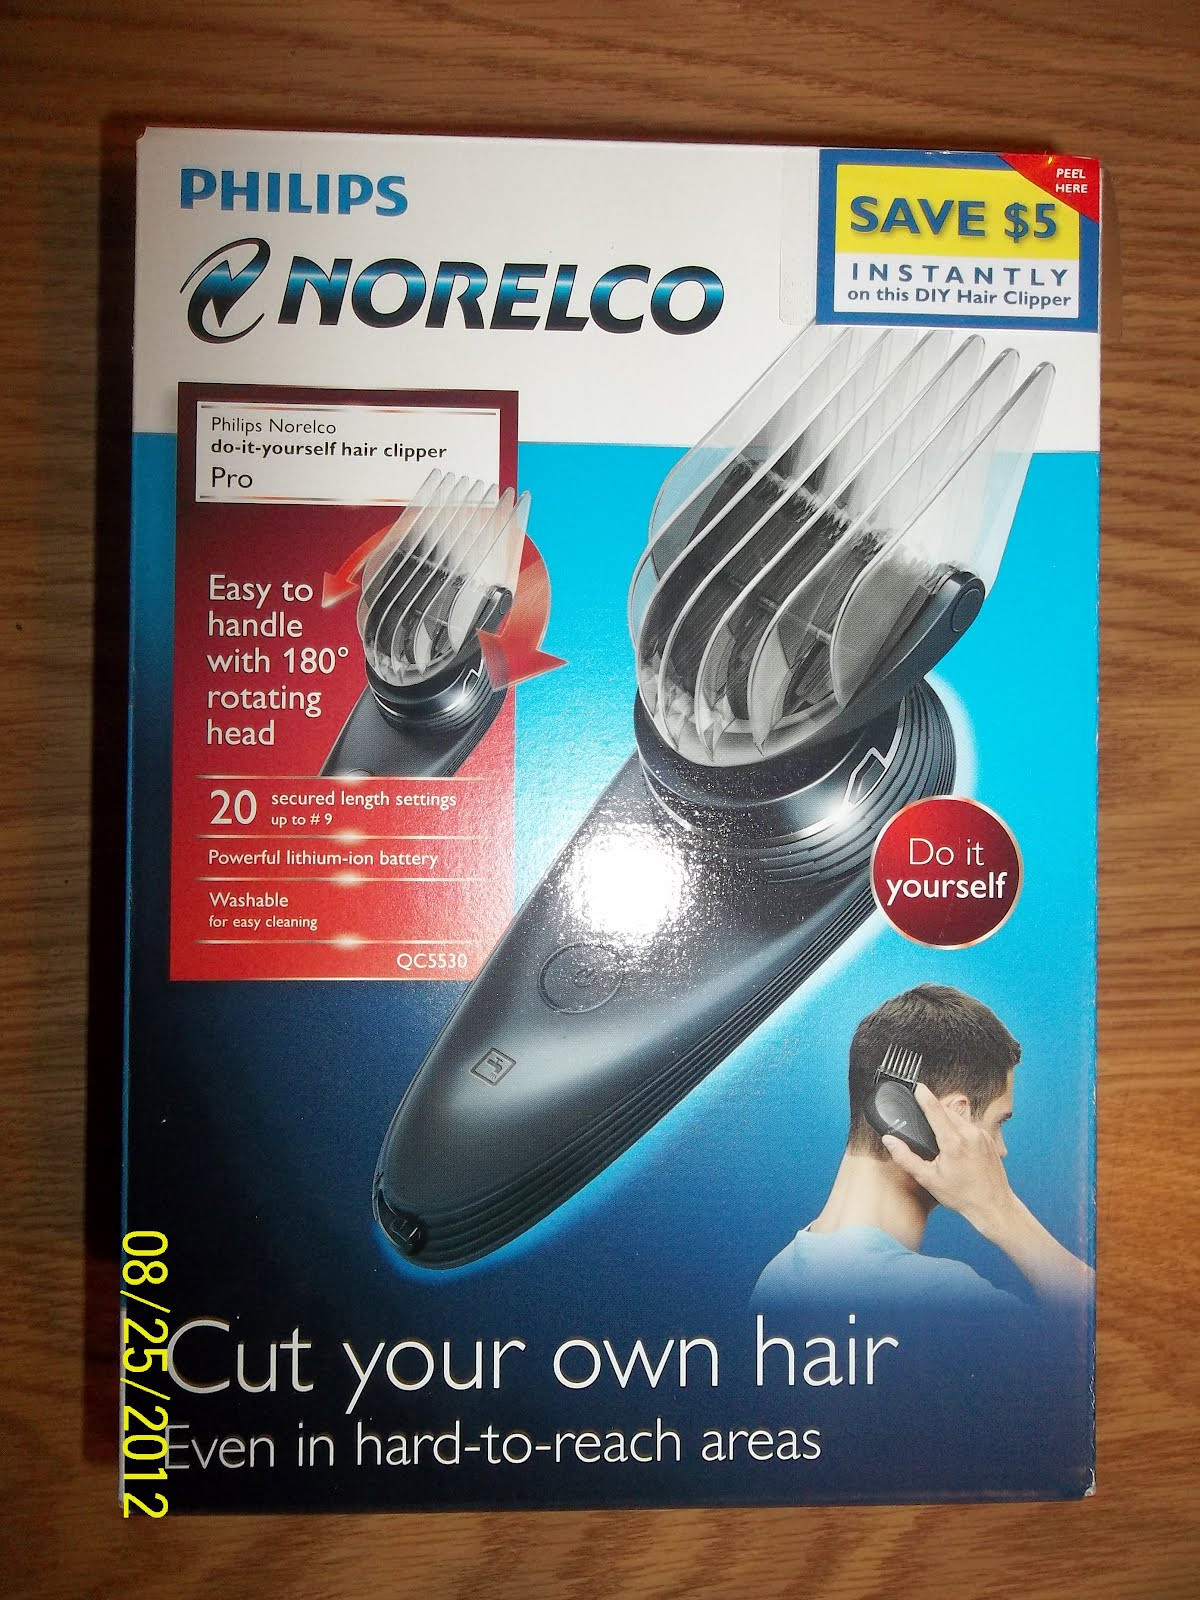 DIY Haircut Clippers
 From Moms to Grandmas Philips Norelco do it yourself